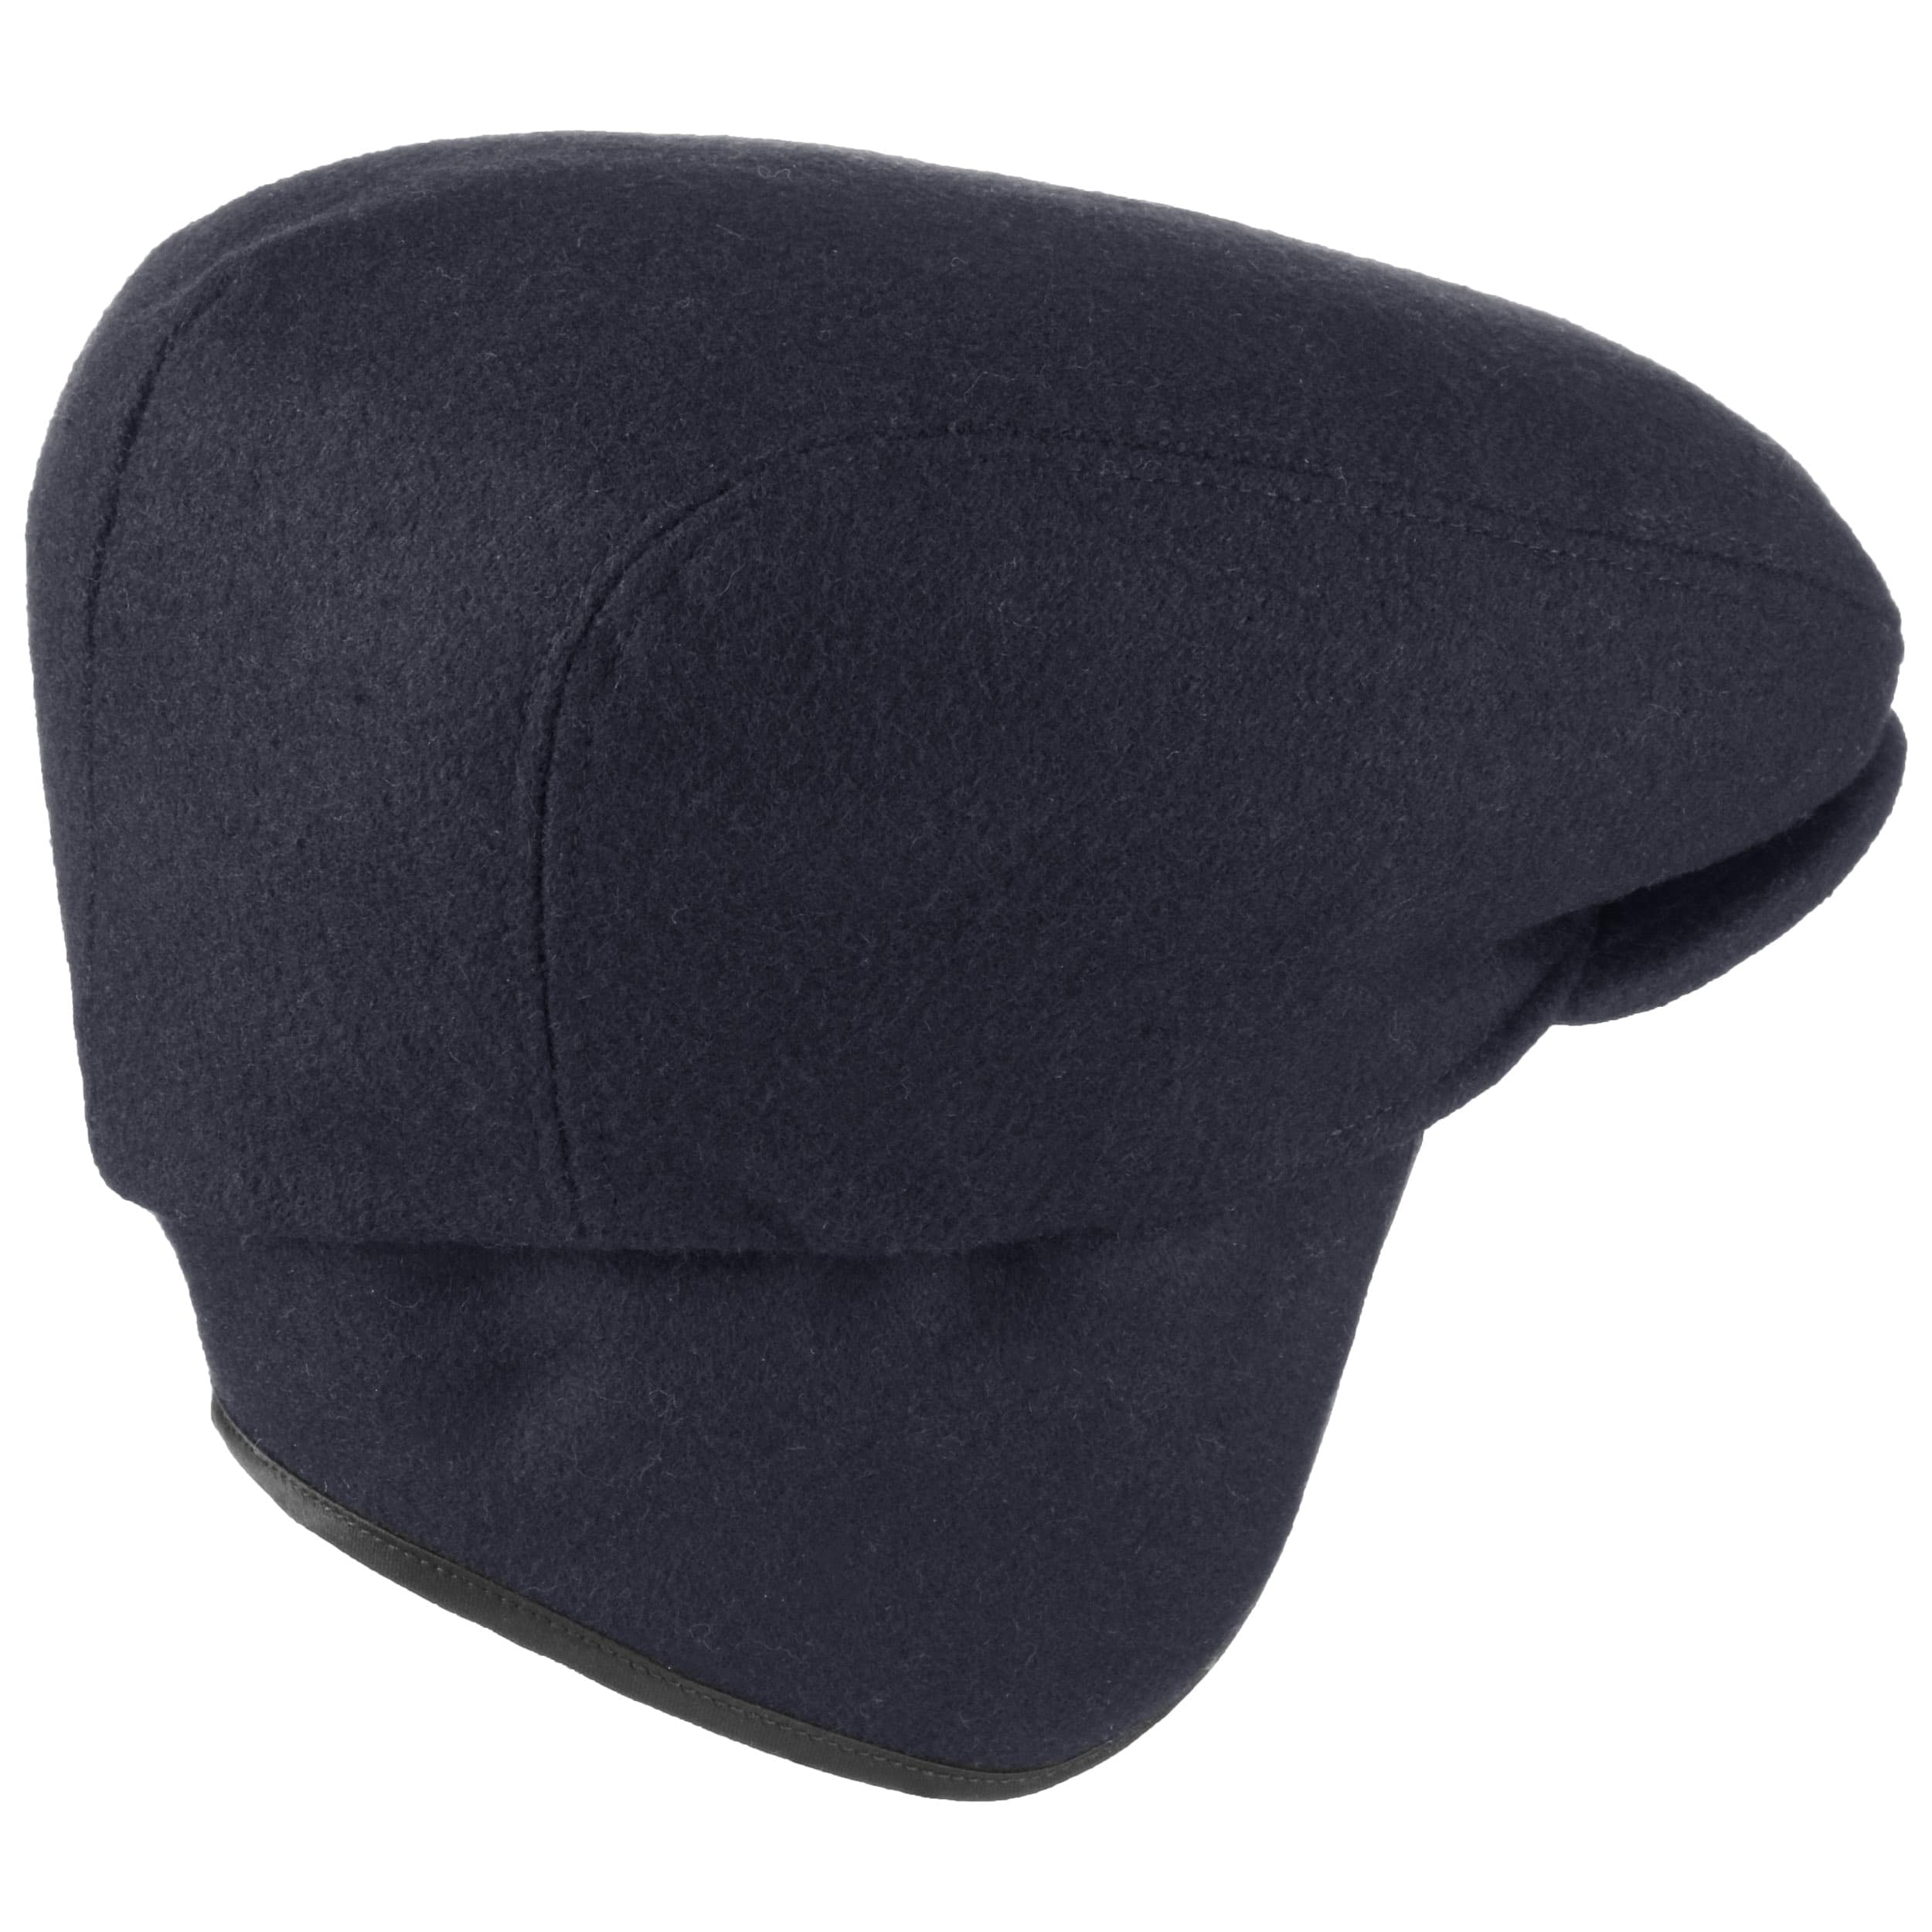 NAVY BLUE RETRO WOOL FLAT CAP WITH EARMUFFS  KEEP YOUR EARS WARM THIS WINTER